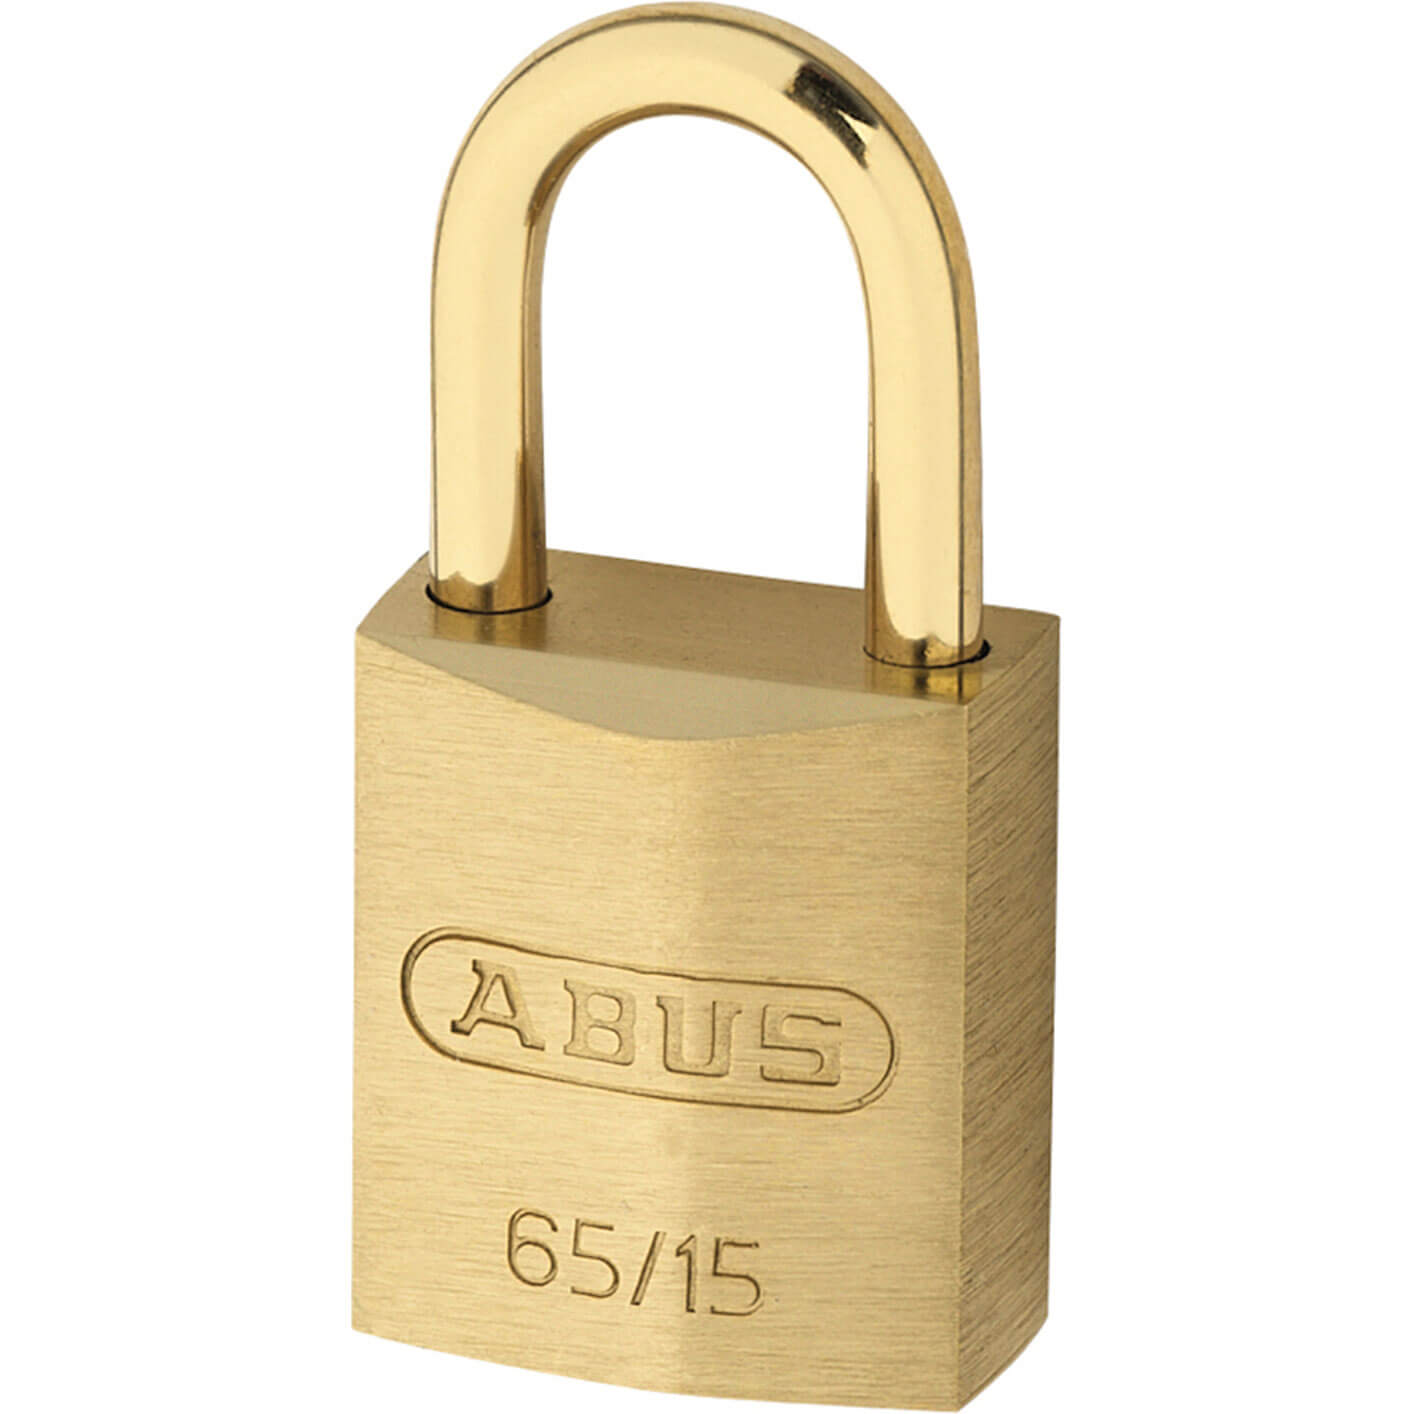 Image of Abus 65 Series Brass Padlock With Brass Shackle 15mm Standard